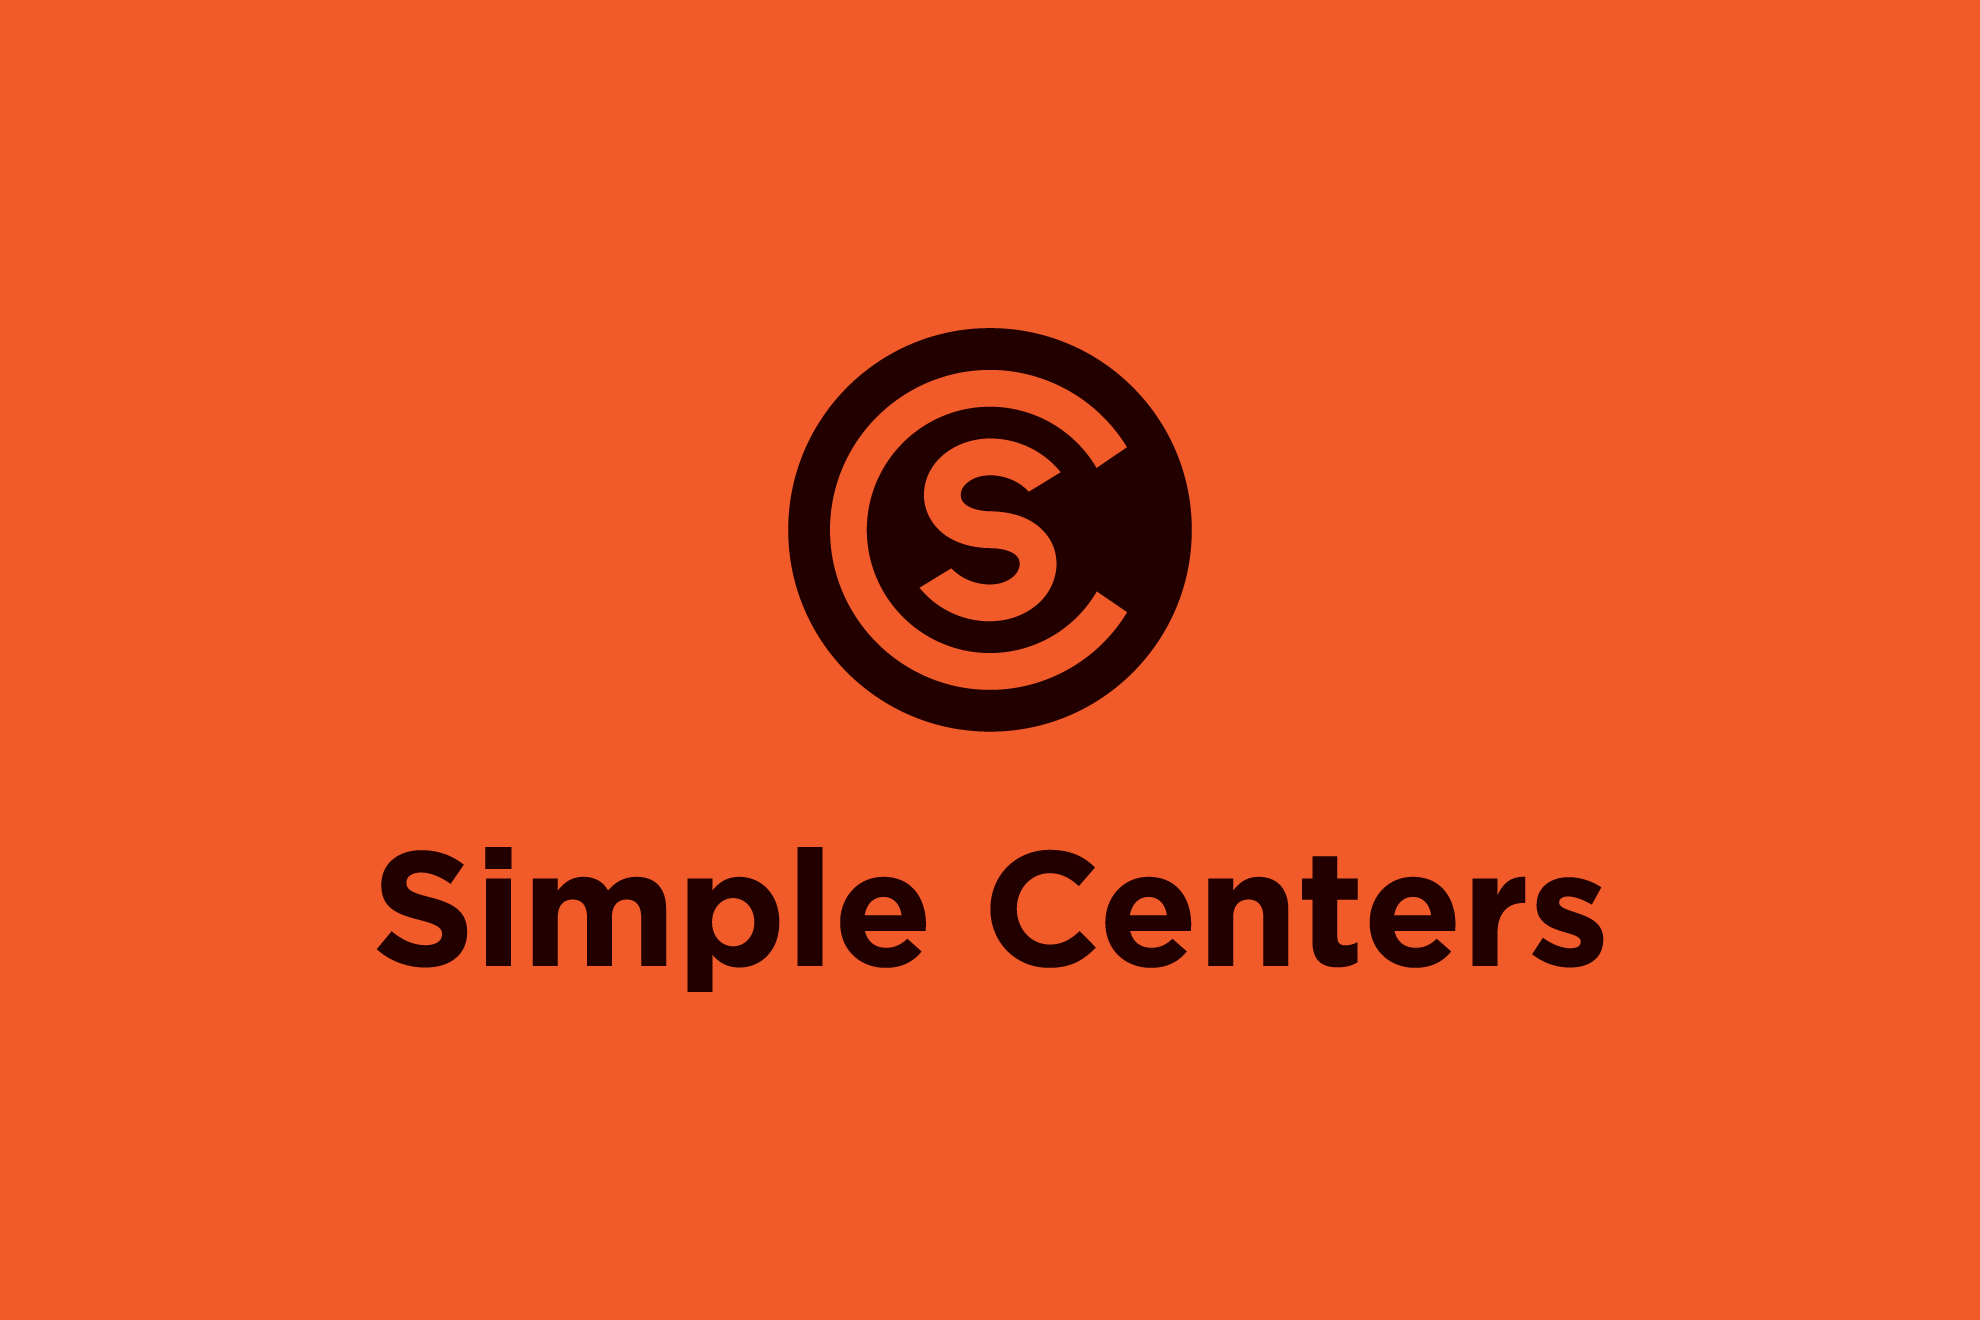 Simple Centers